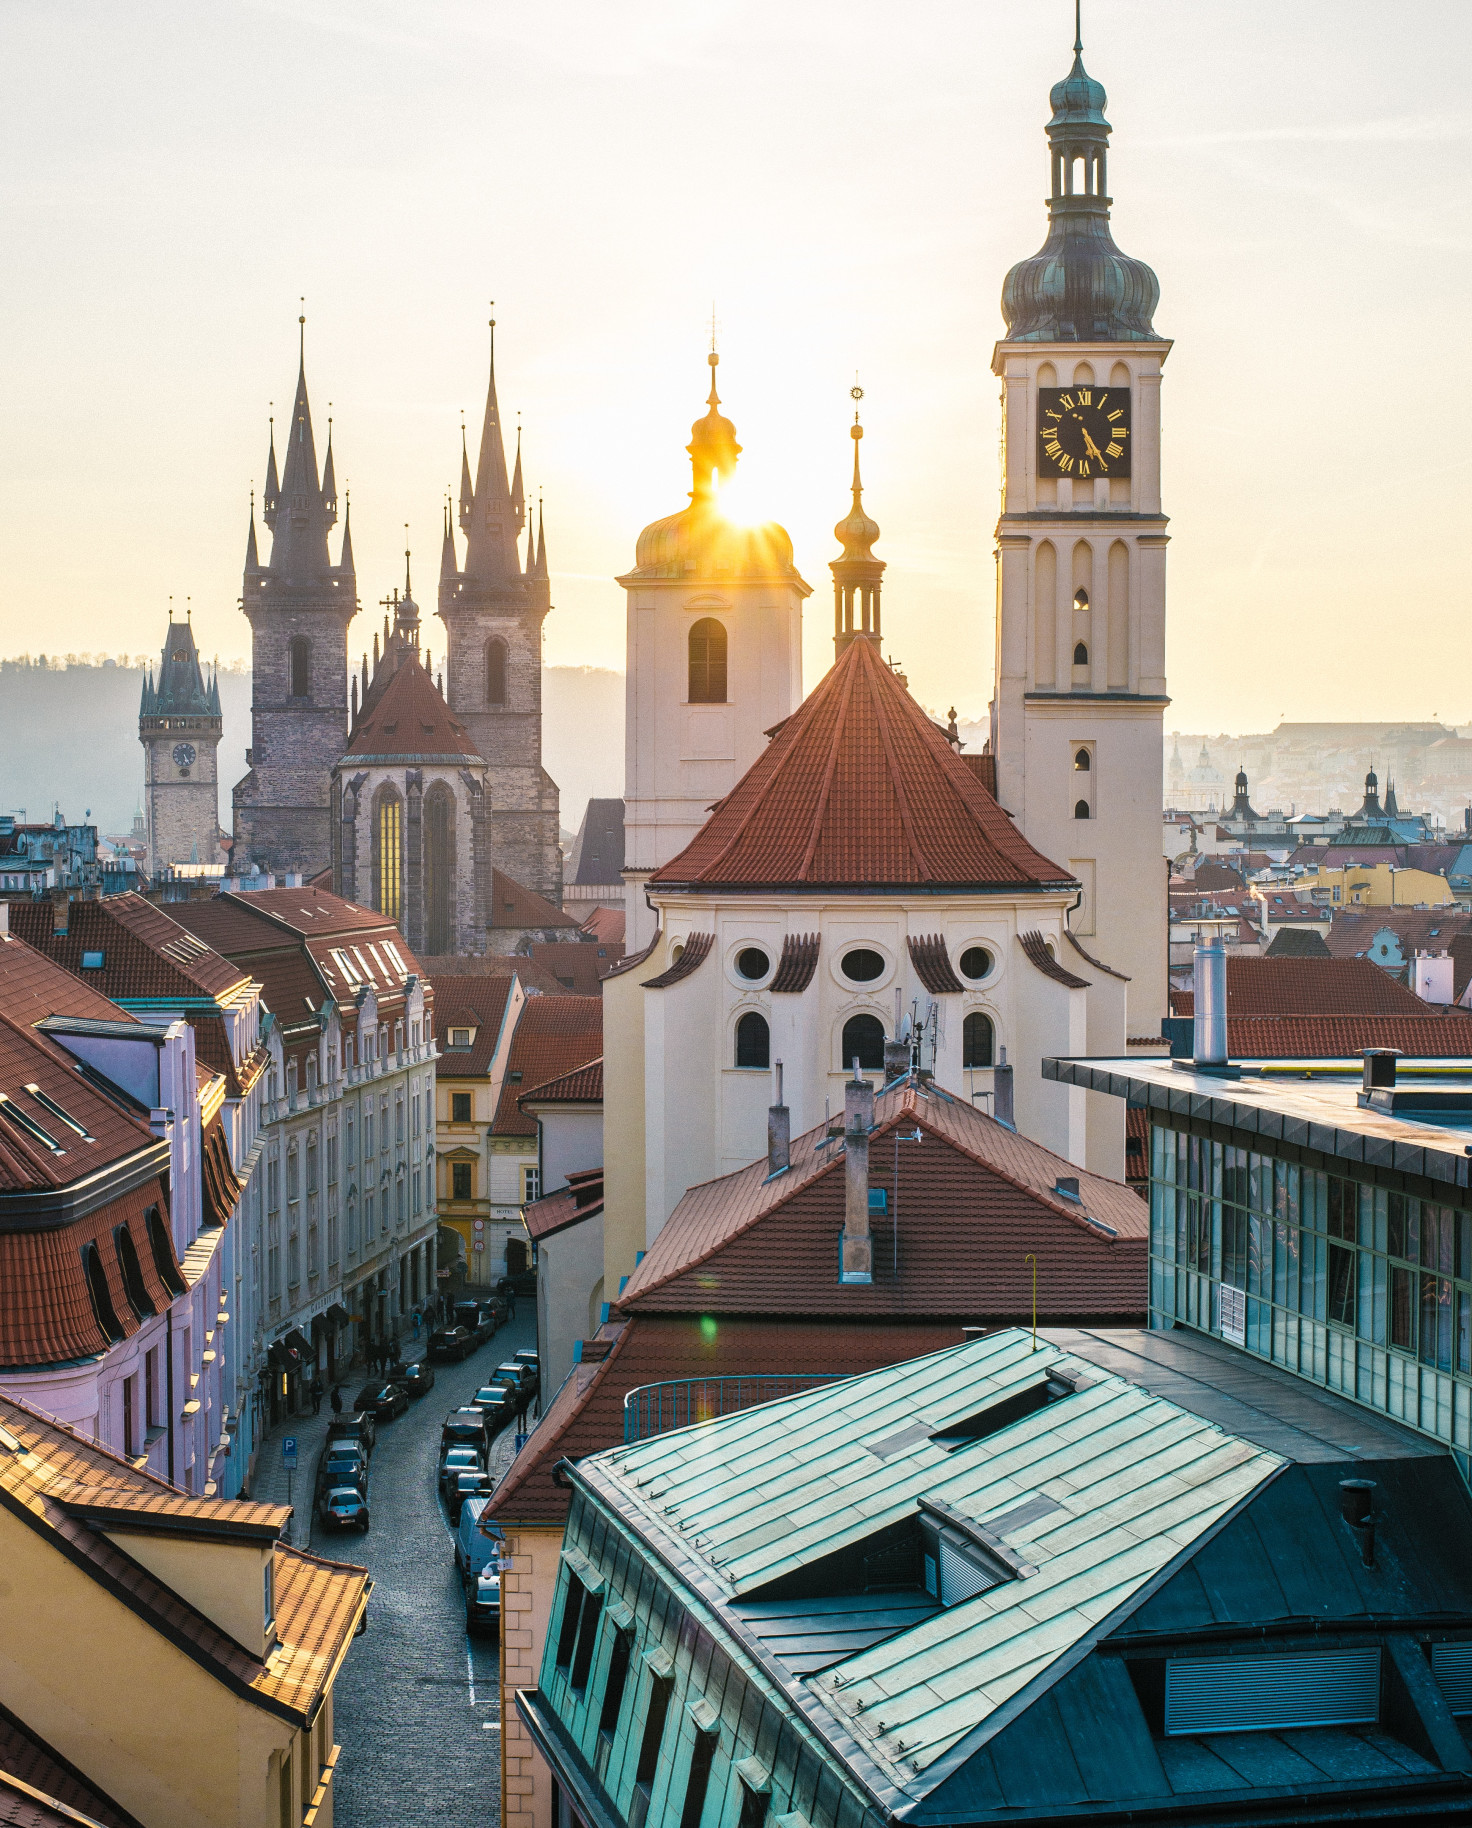 View of buildings and street during sunset in Prague